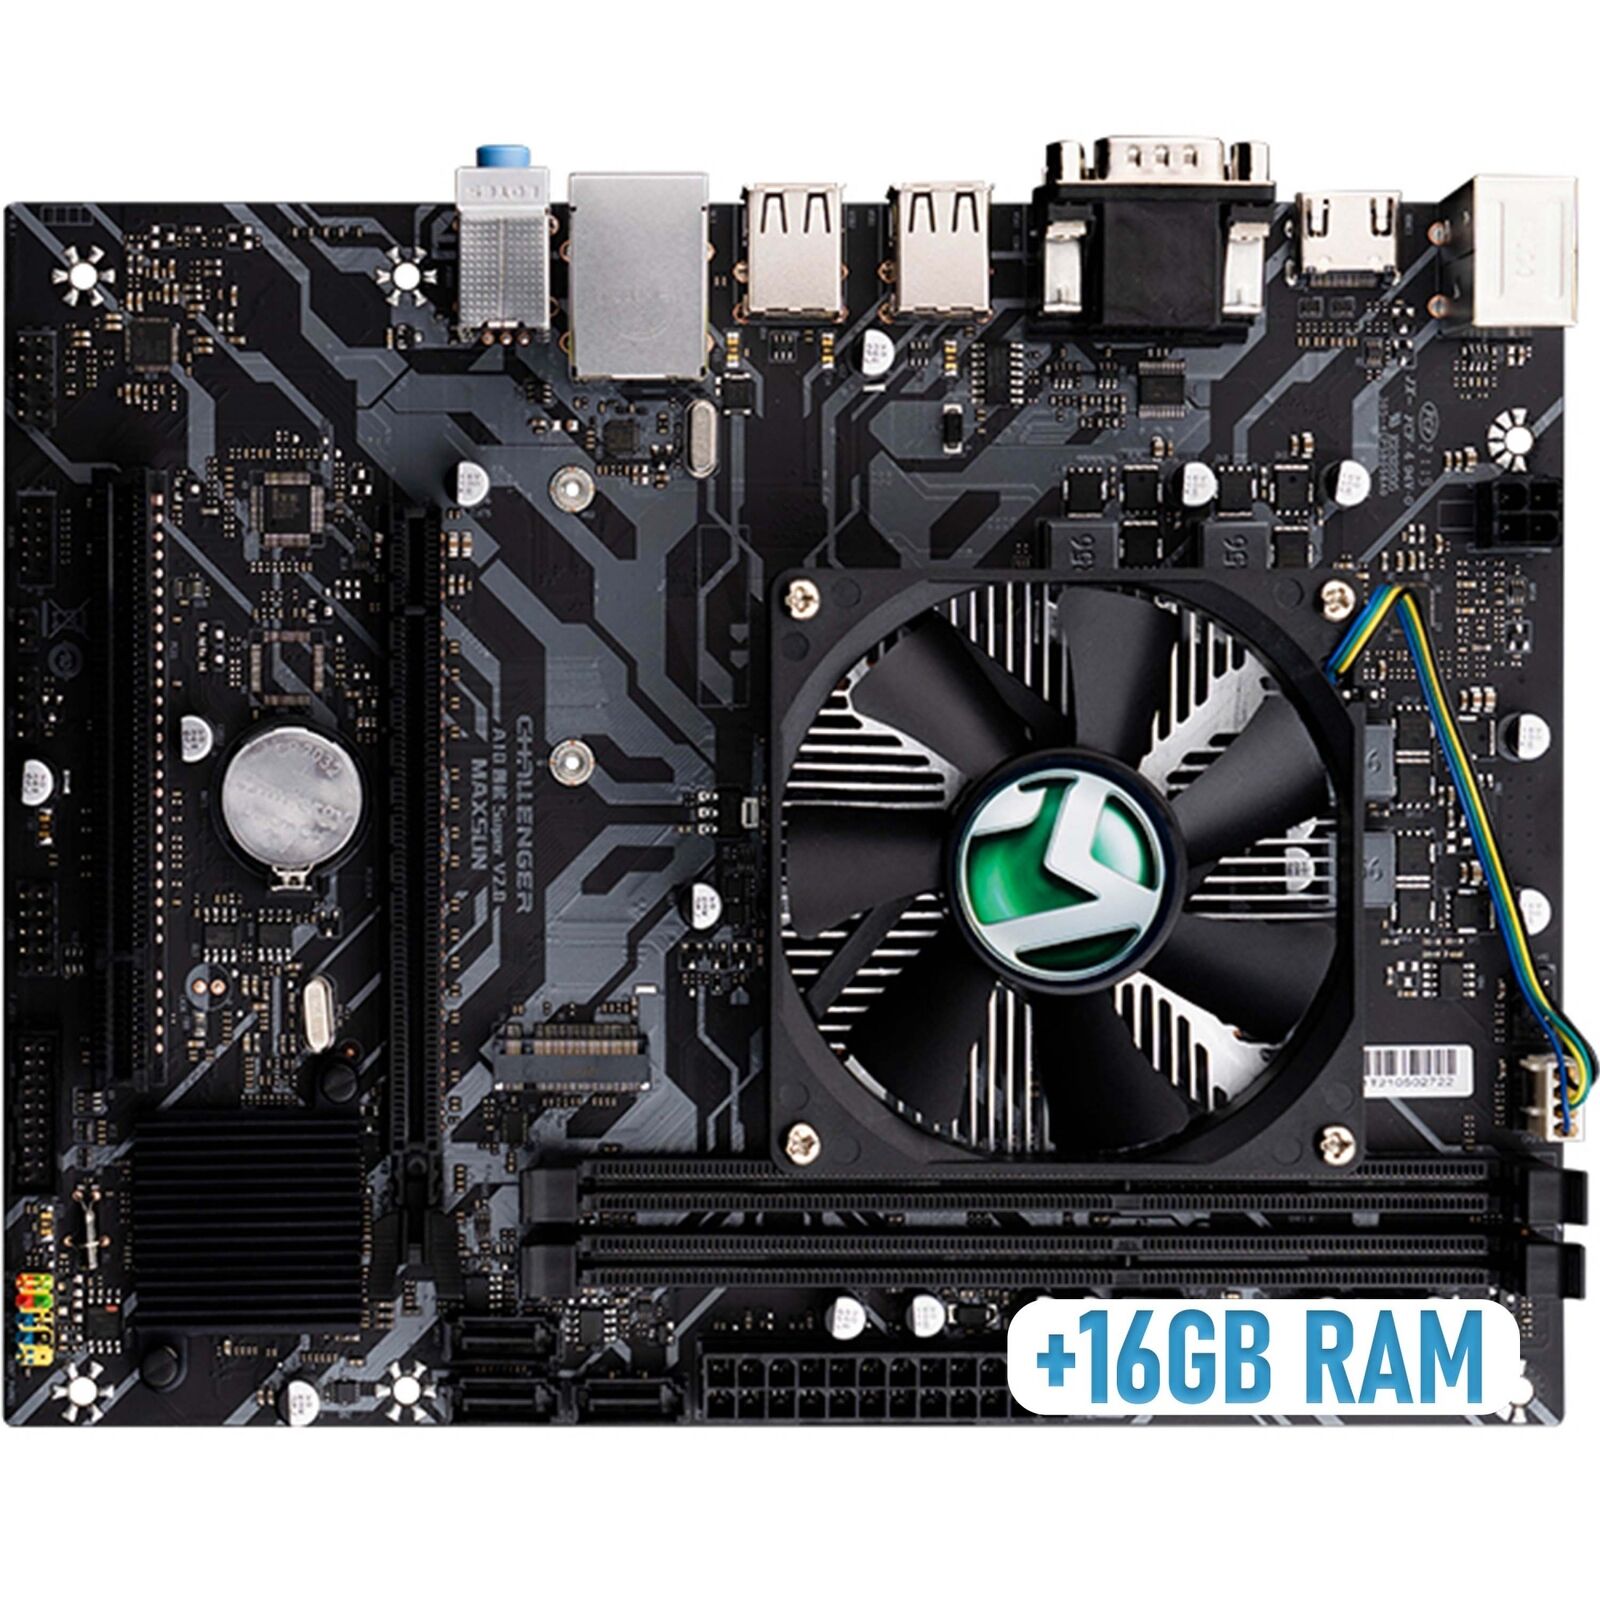 Motherboard With Processor Heatsink And 16gb RAM Included Quadcore M-ATX Rs232_